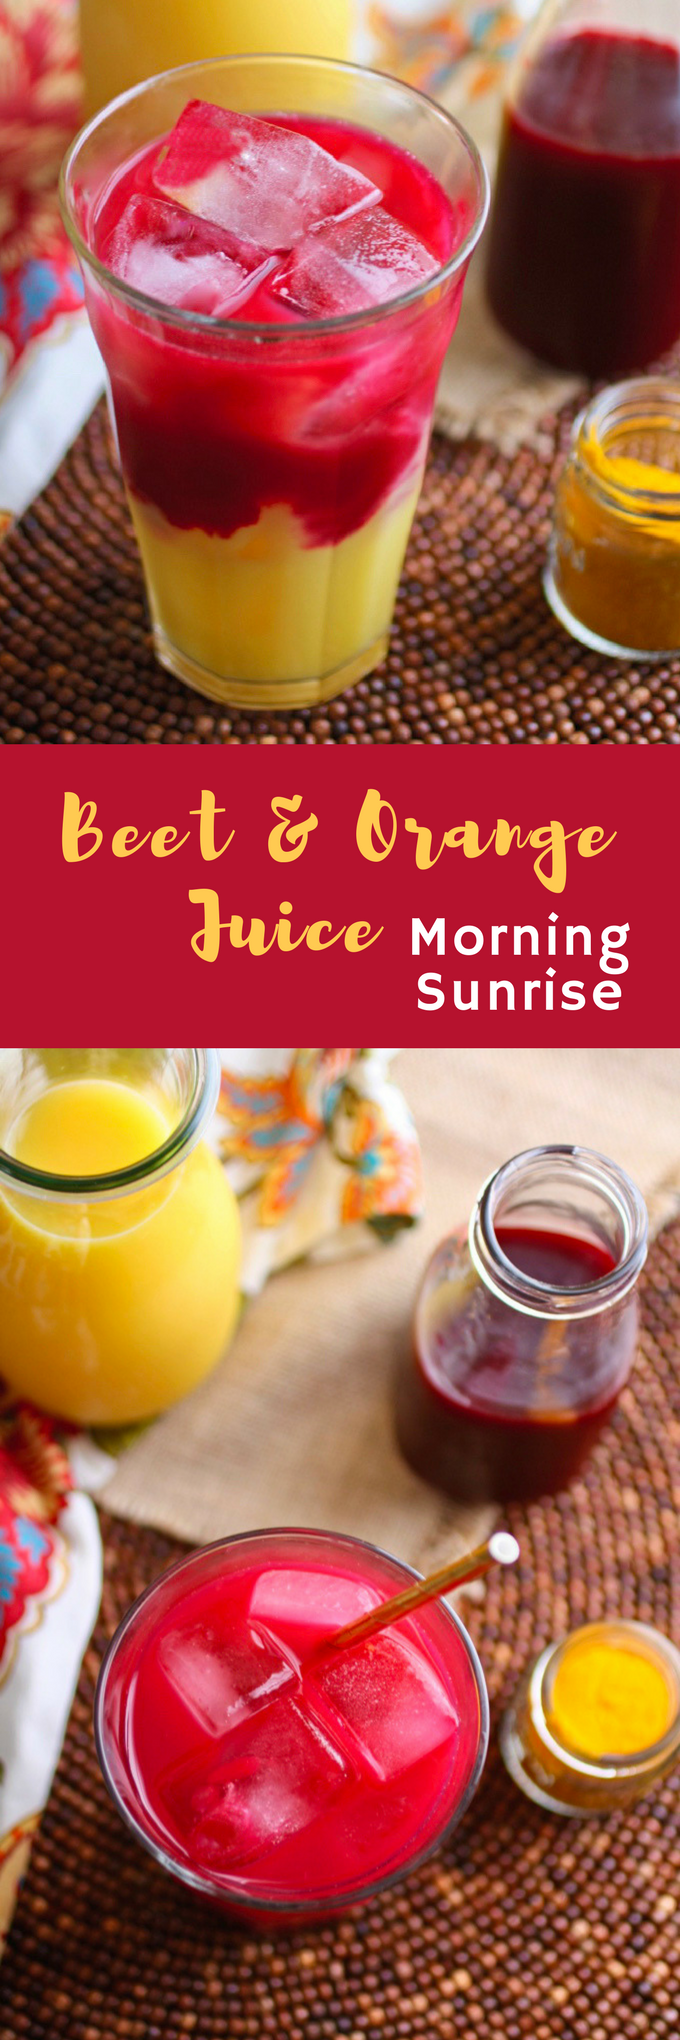 Beet & Orange Juice Morning Sunrise will make your day! You'll love the colors and flavors in this drink!